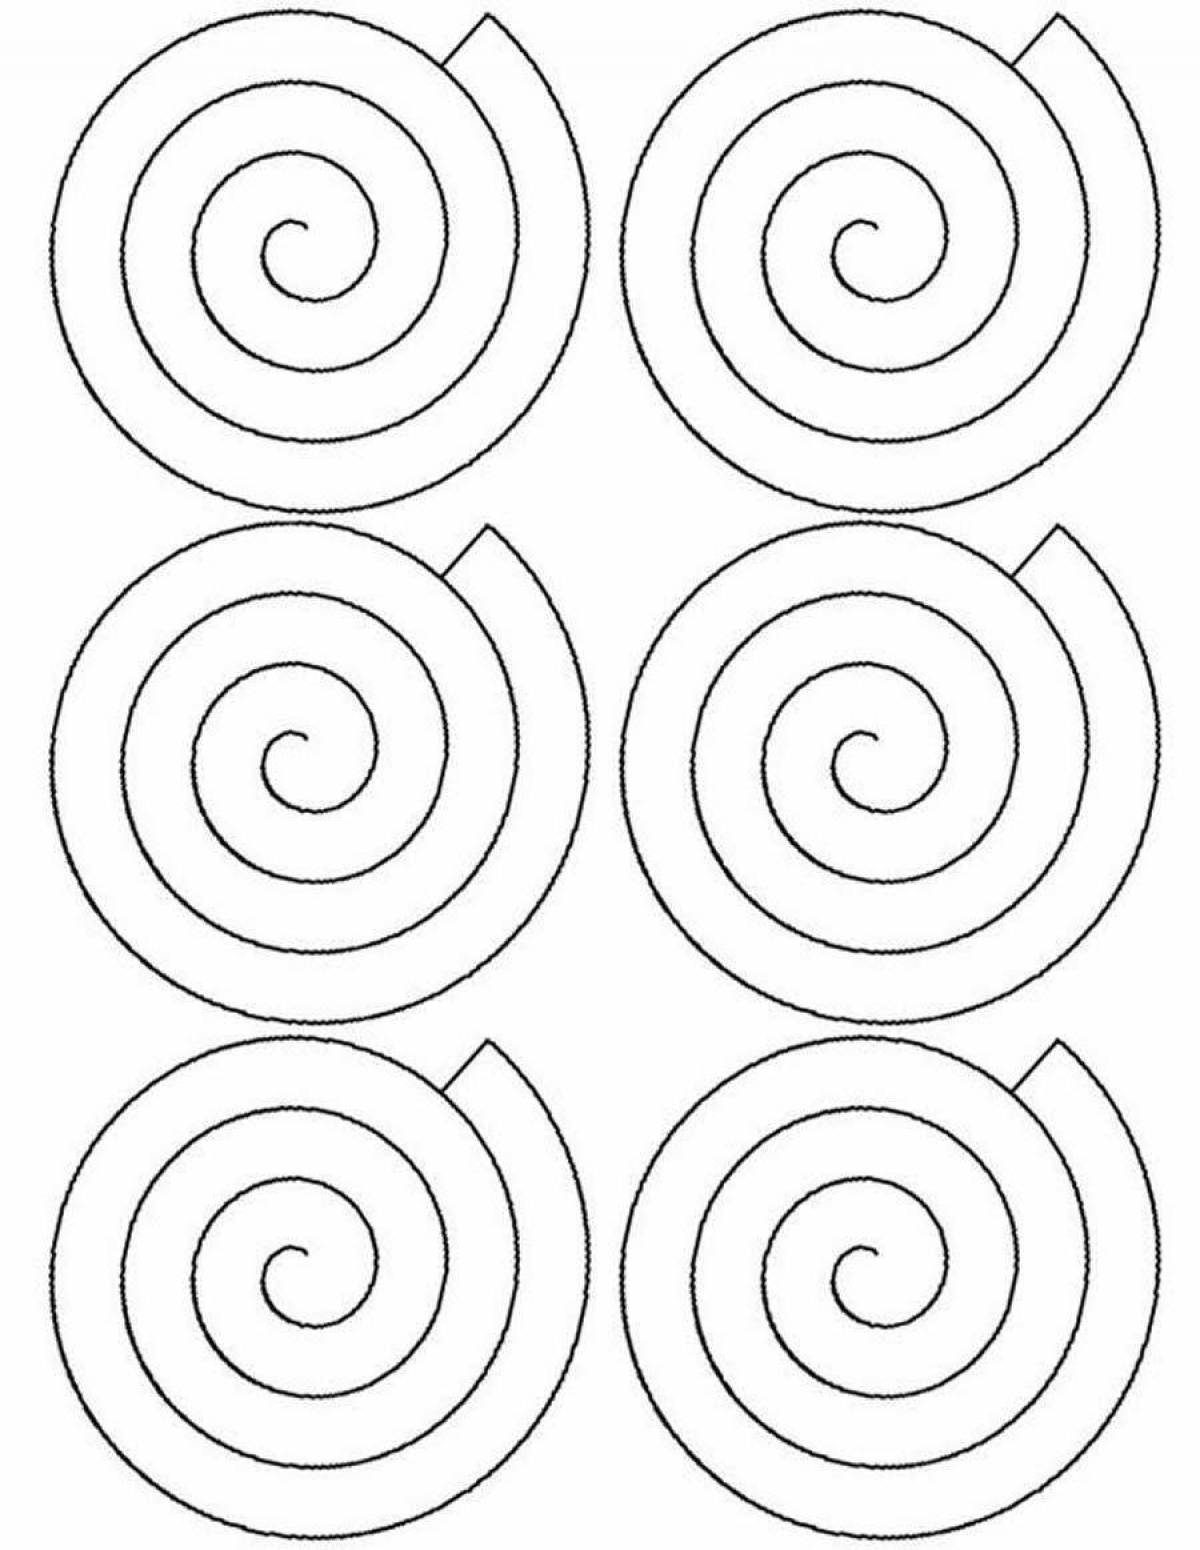 Great spiral coloring app